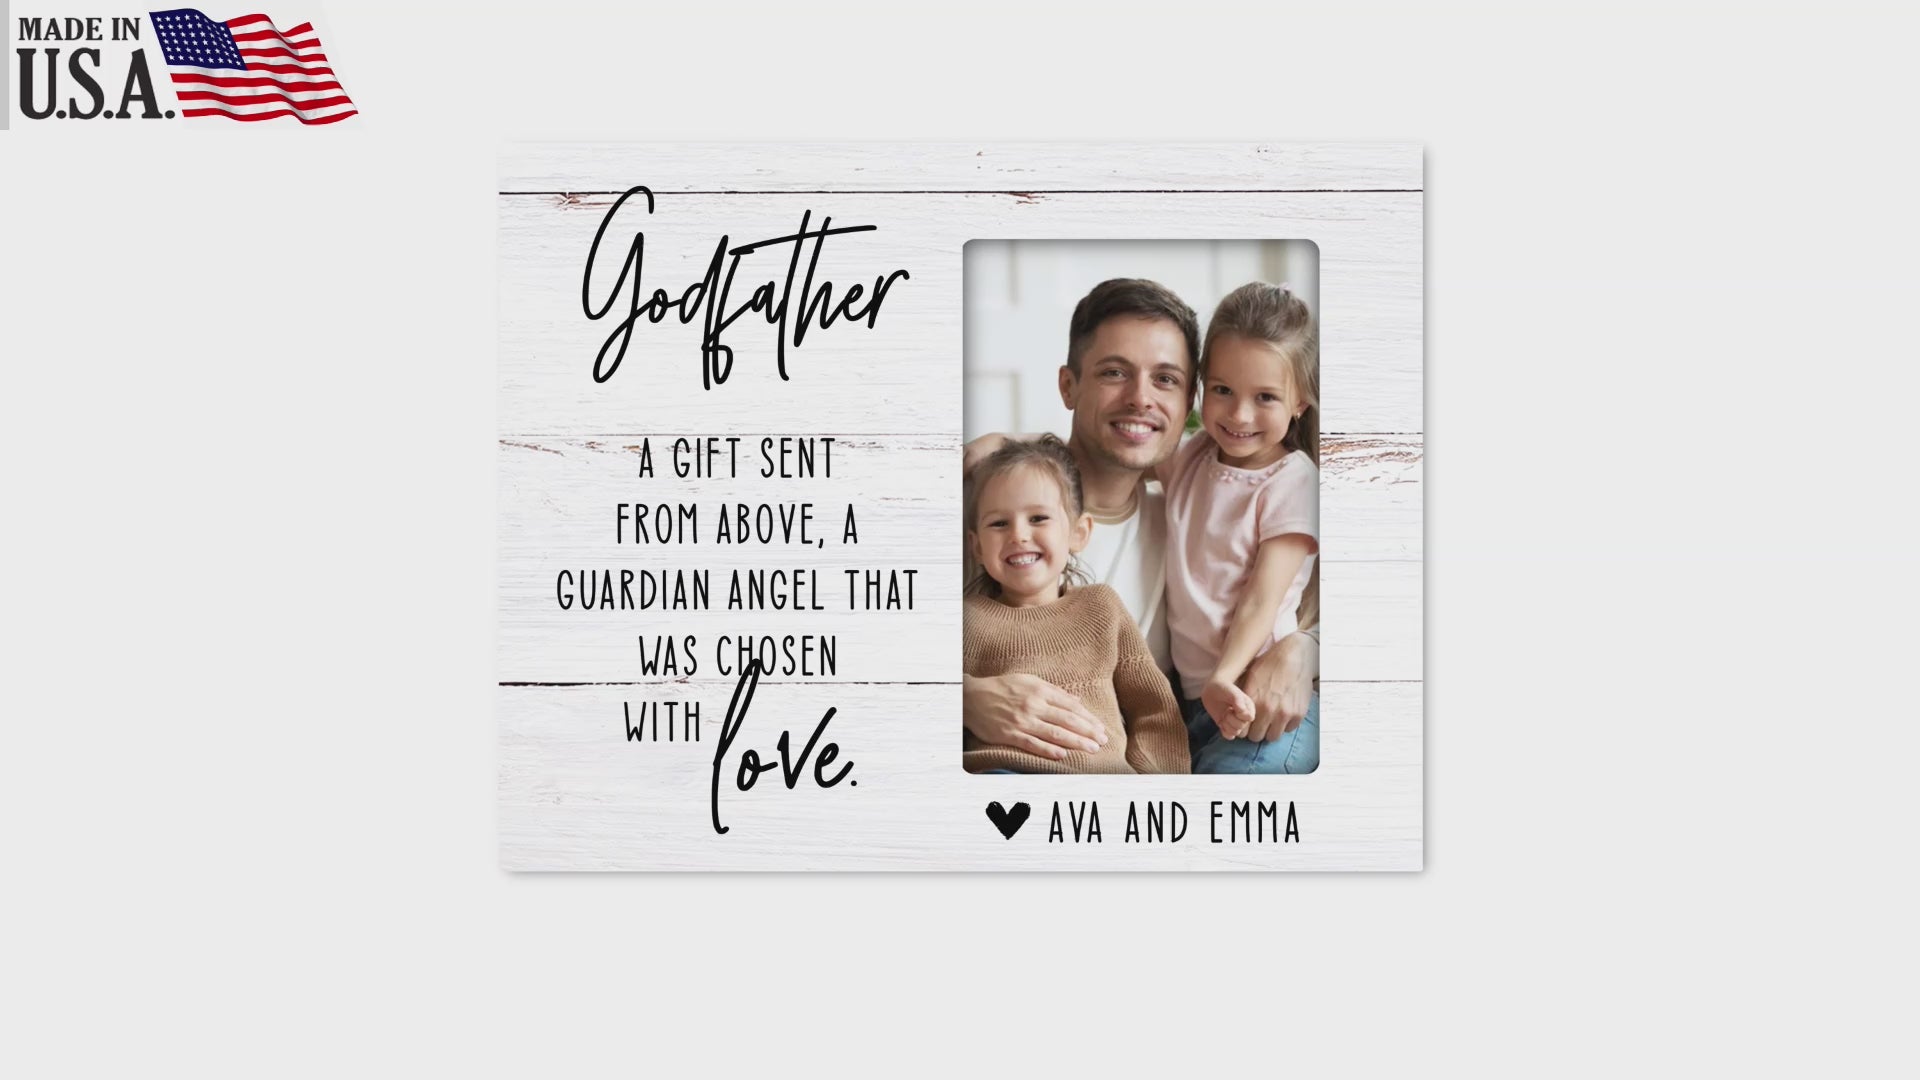 Personalized Godfather Wooden Picture Frame